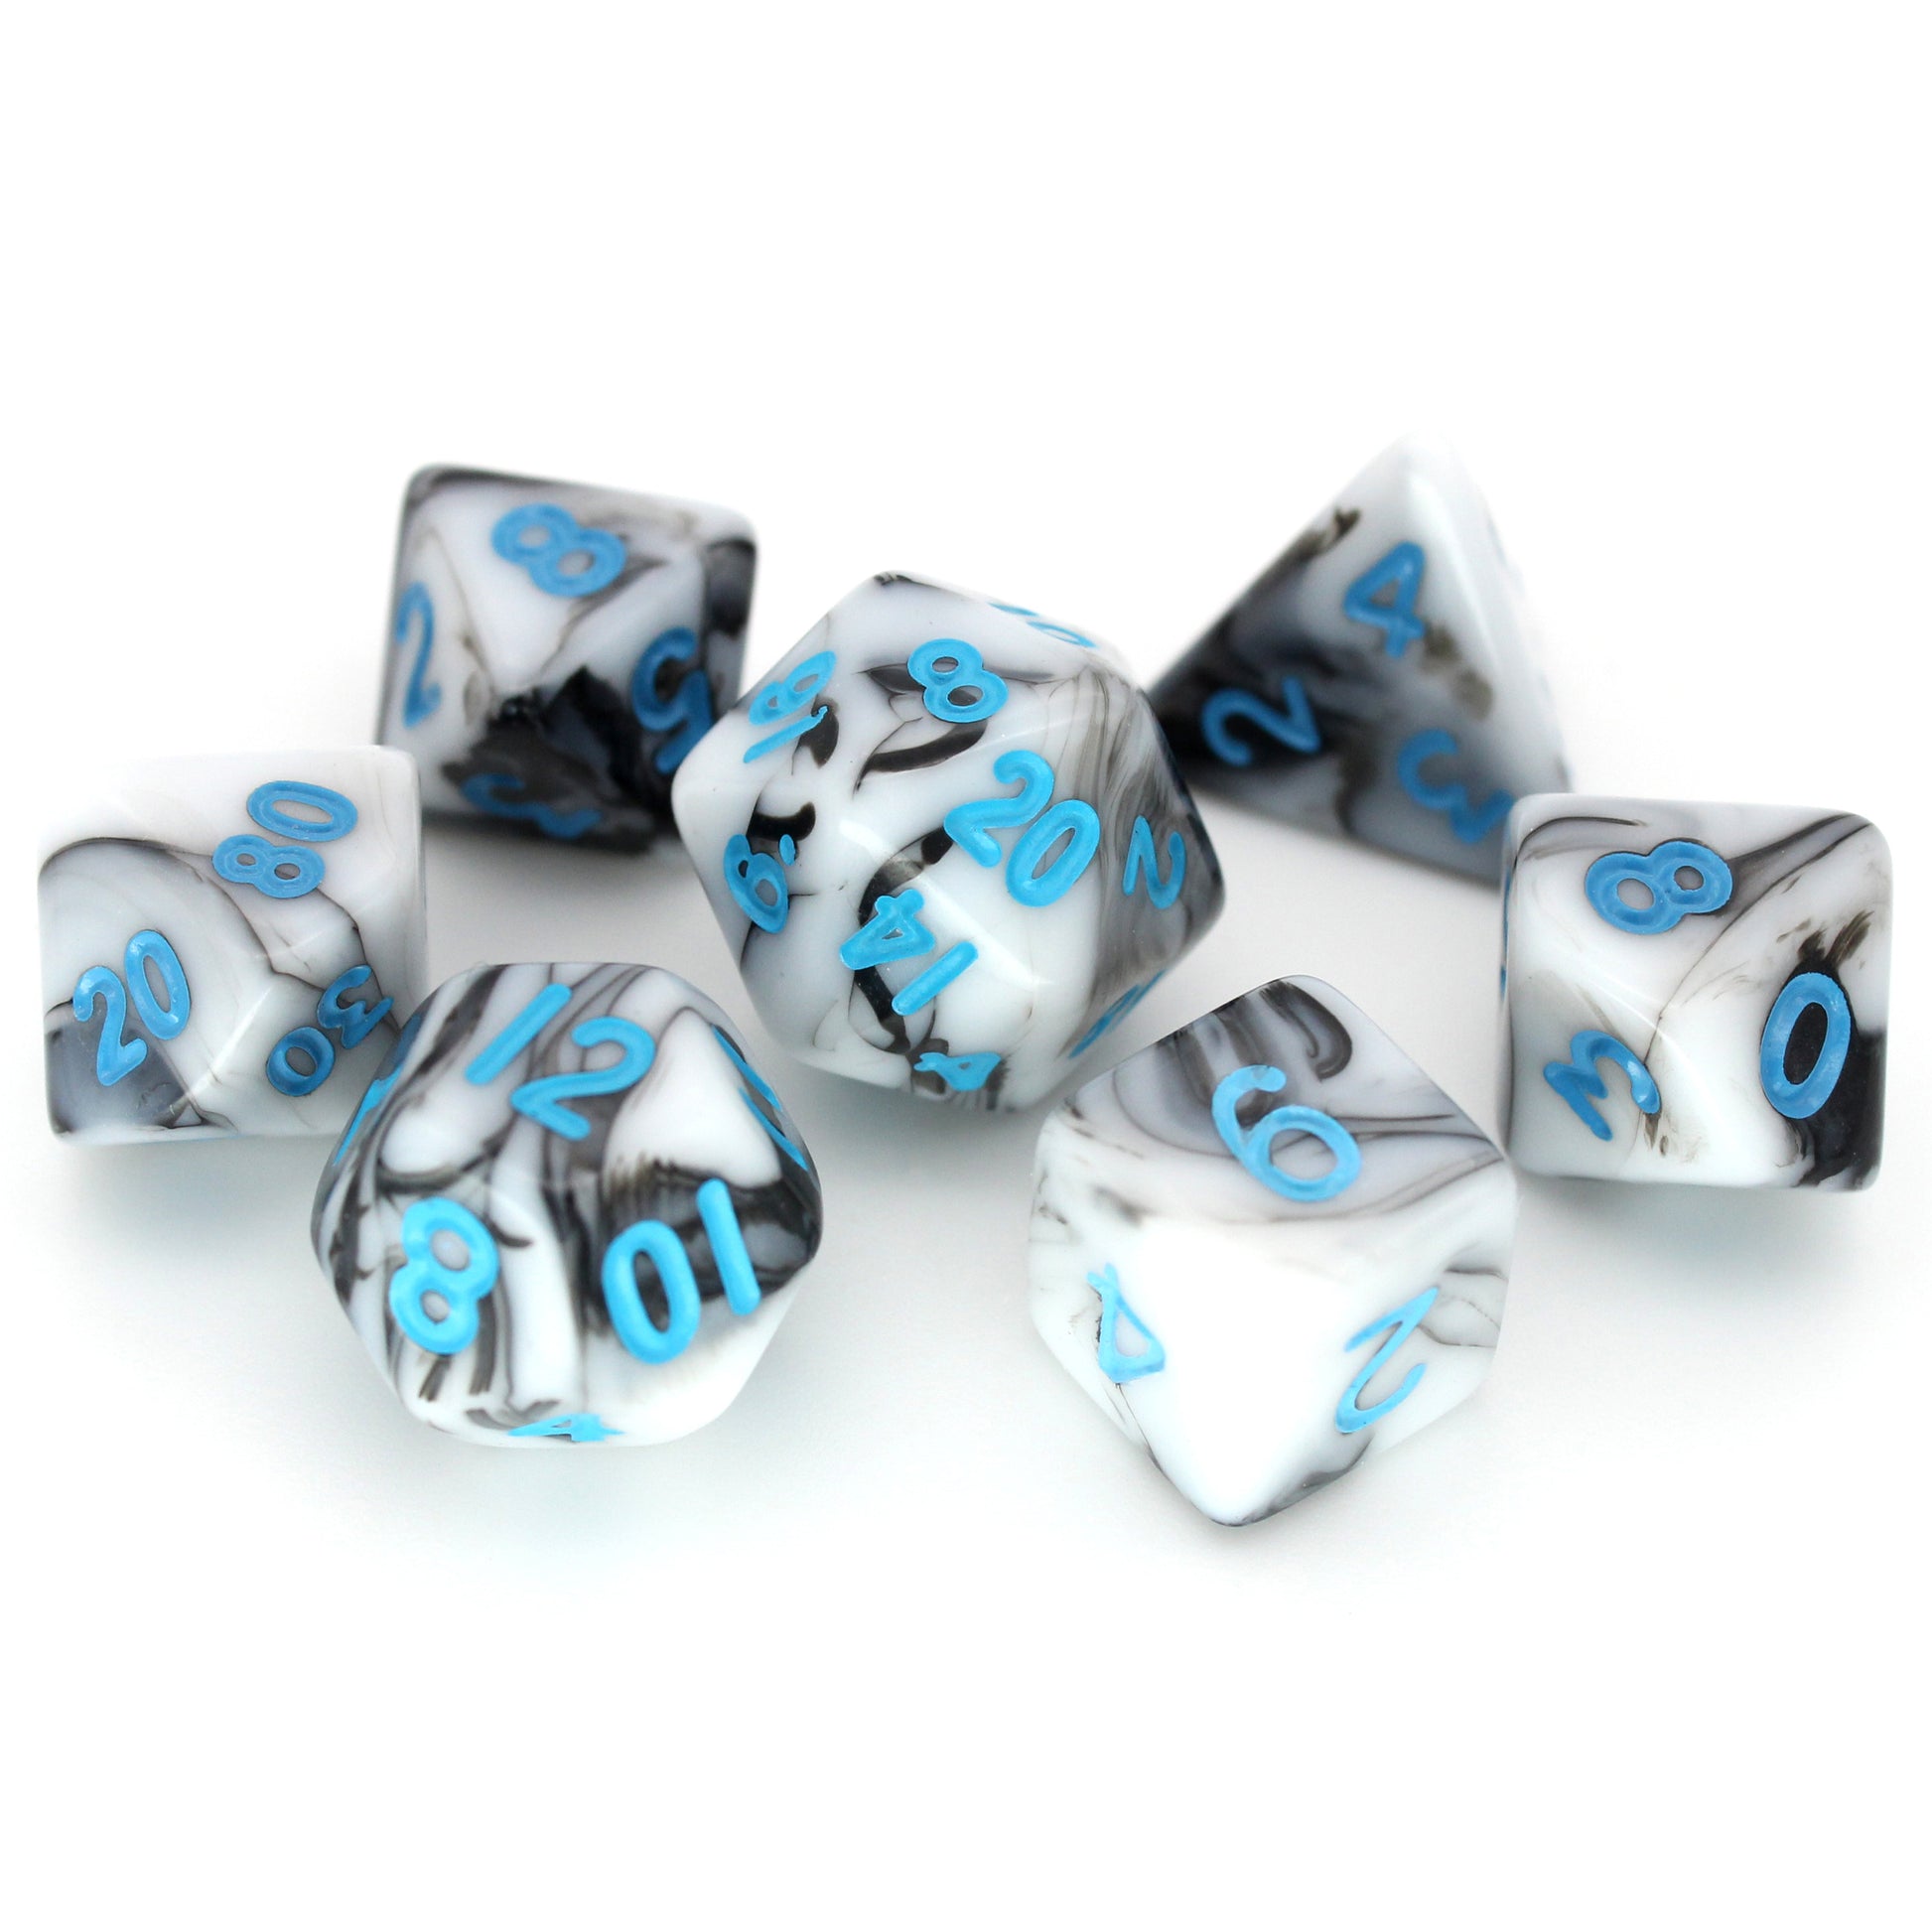 D'ception is a 7-piece 13mm resin dice set with swirls of black and white, inked in blue. It belongs to our tiny but mighty Wee Lads collection.